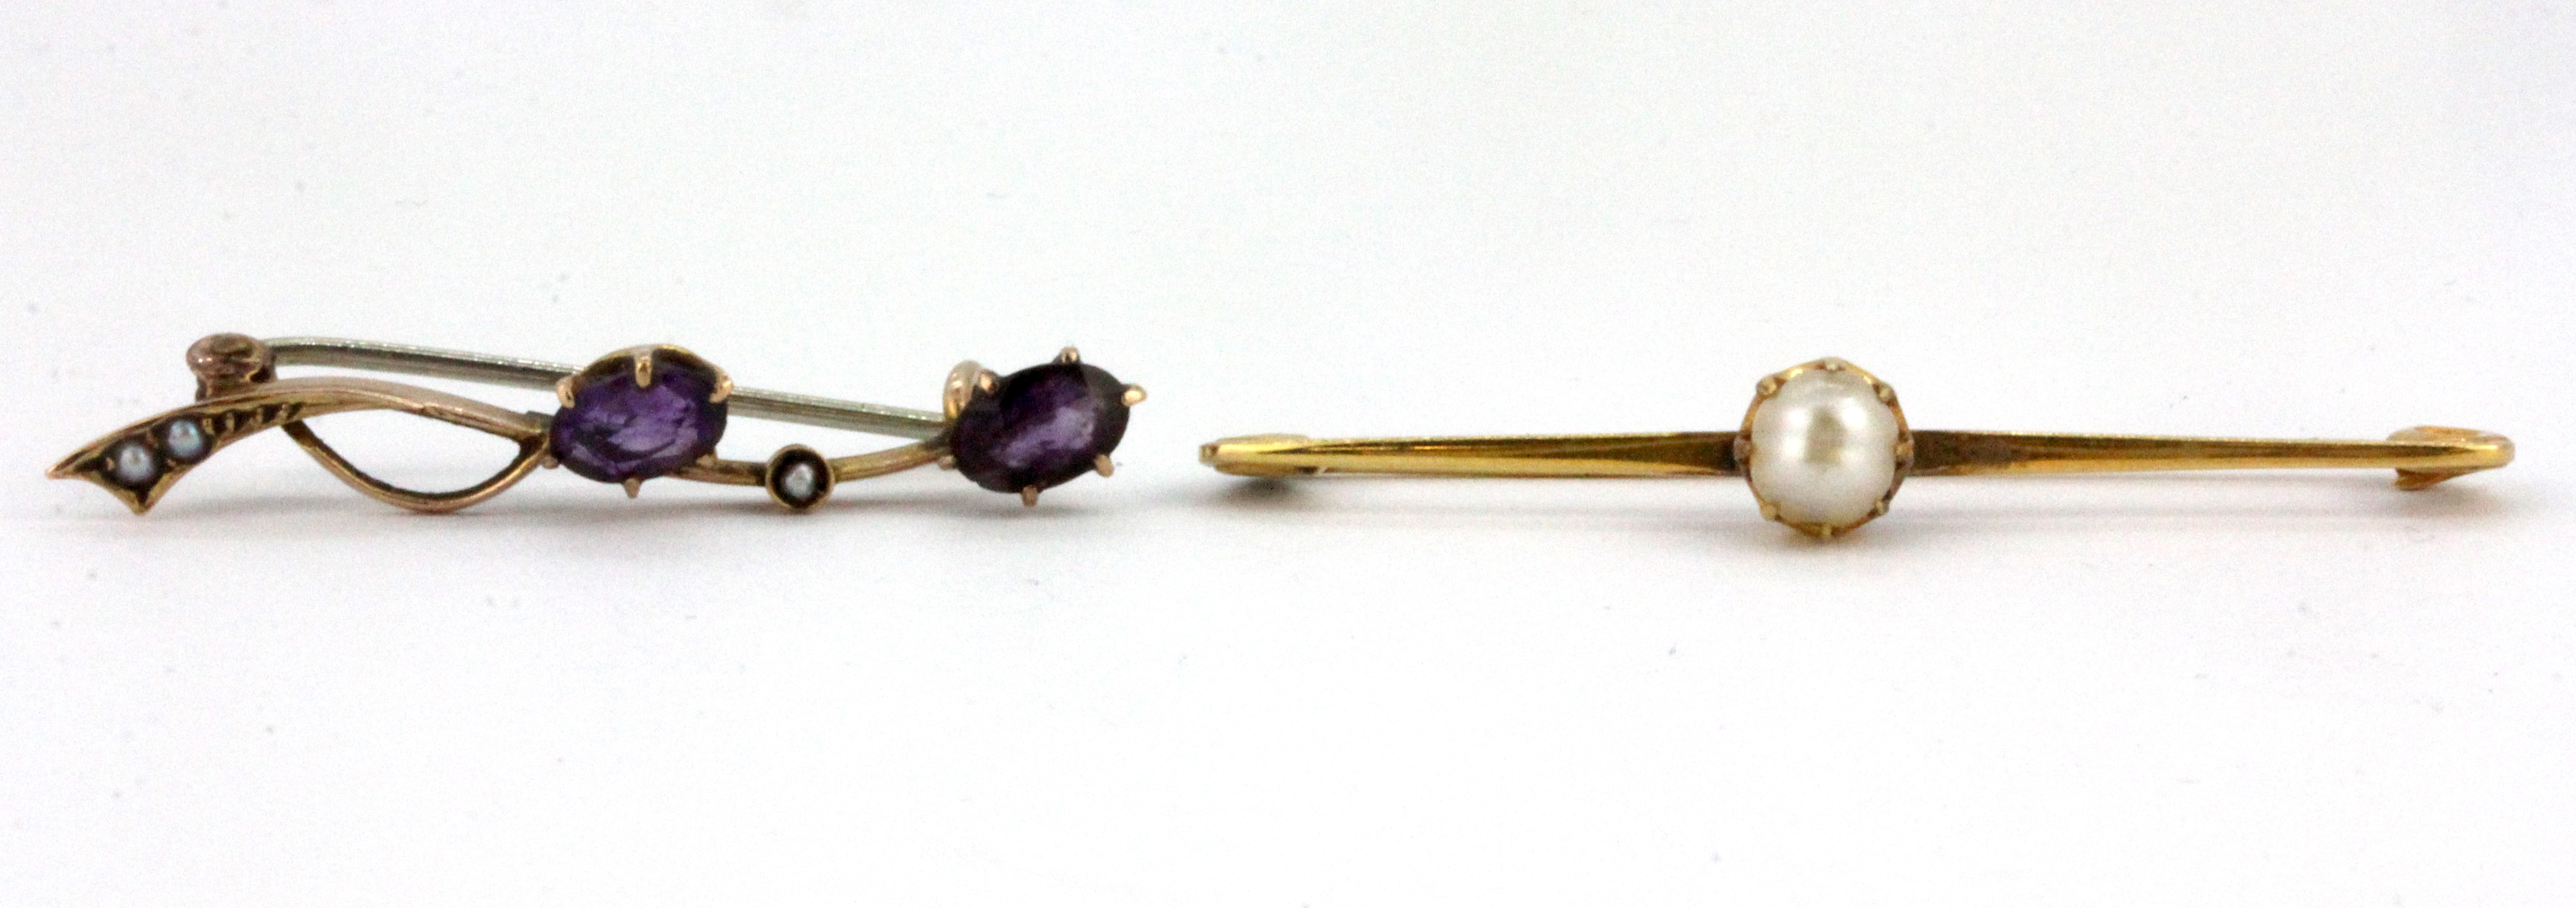 Two 9ct yellow gold brooches, set with amethysts and pearls, L. 3.5 & 4cm.